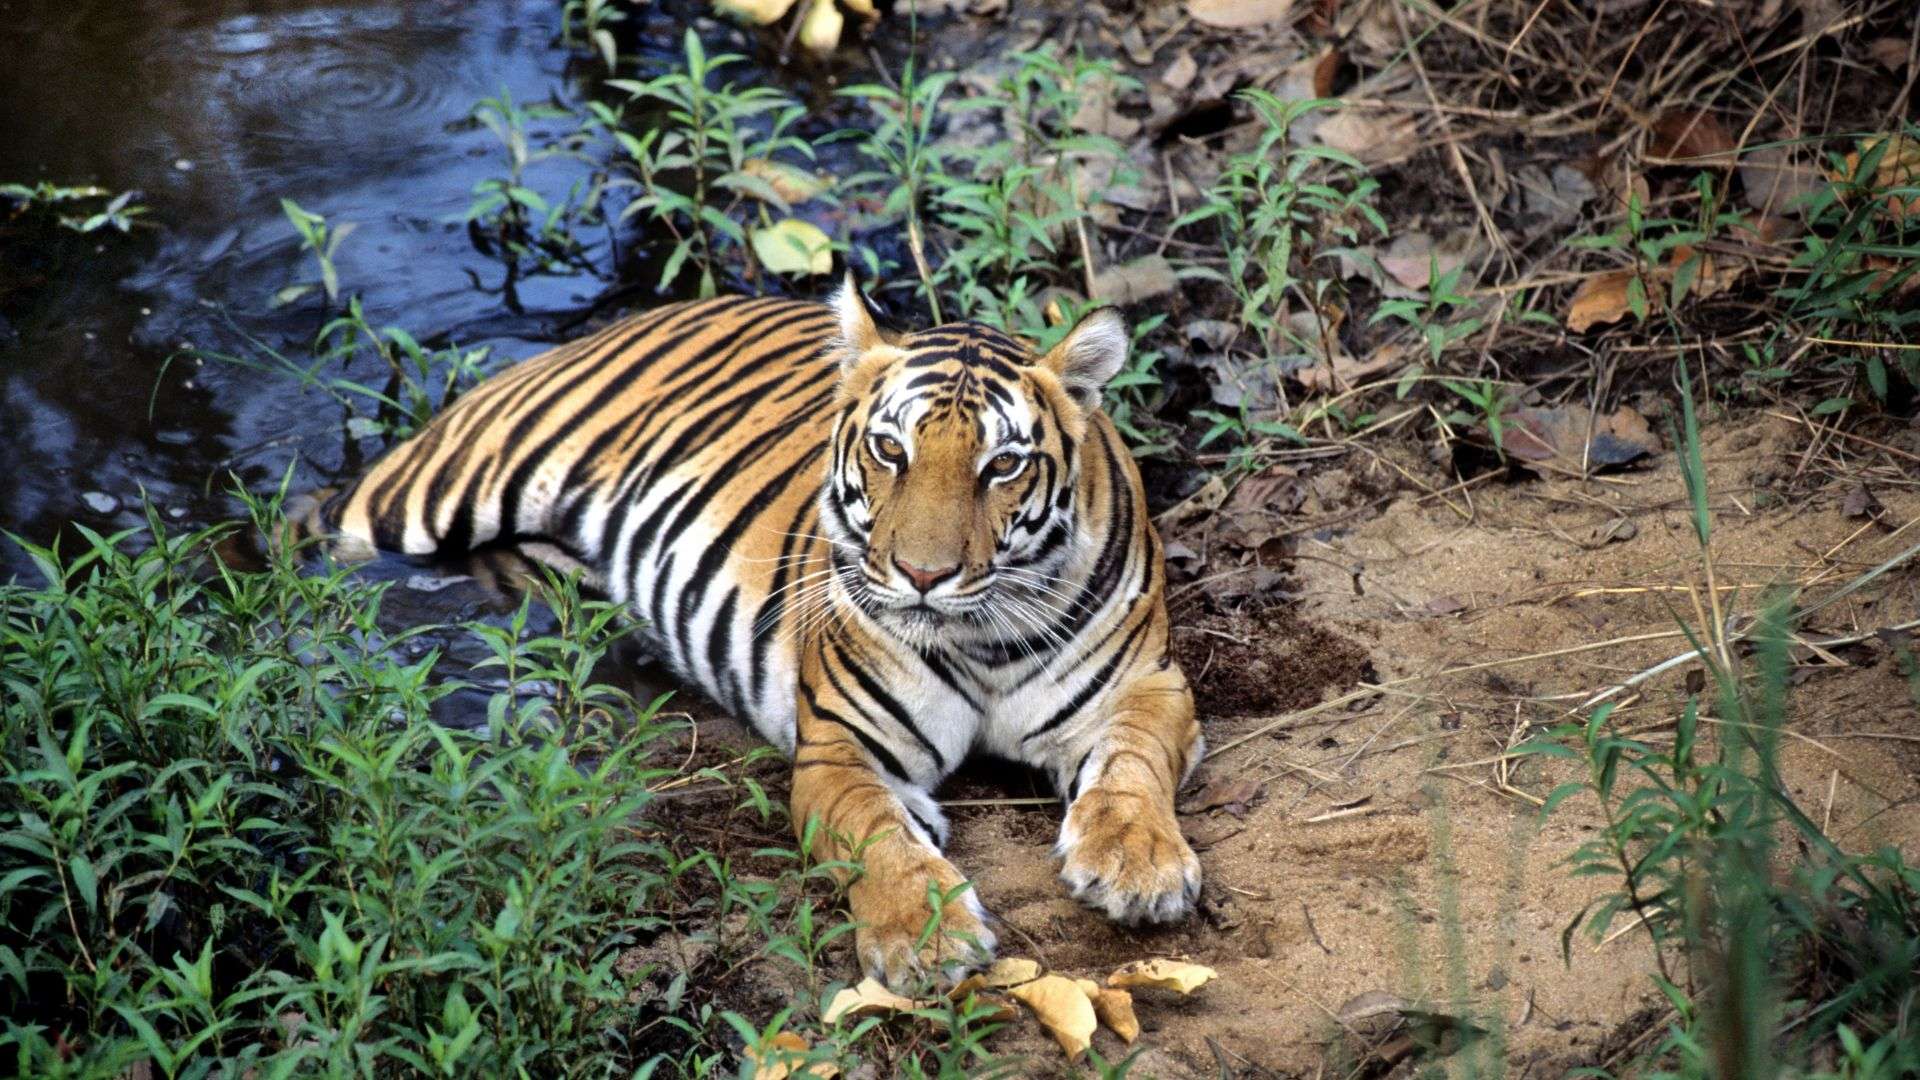 Tiger (Panthera tigris) lying with rear limbs in a pool of water, India.